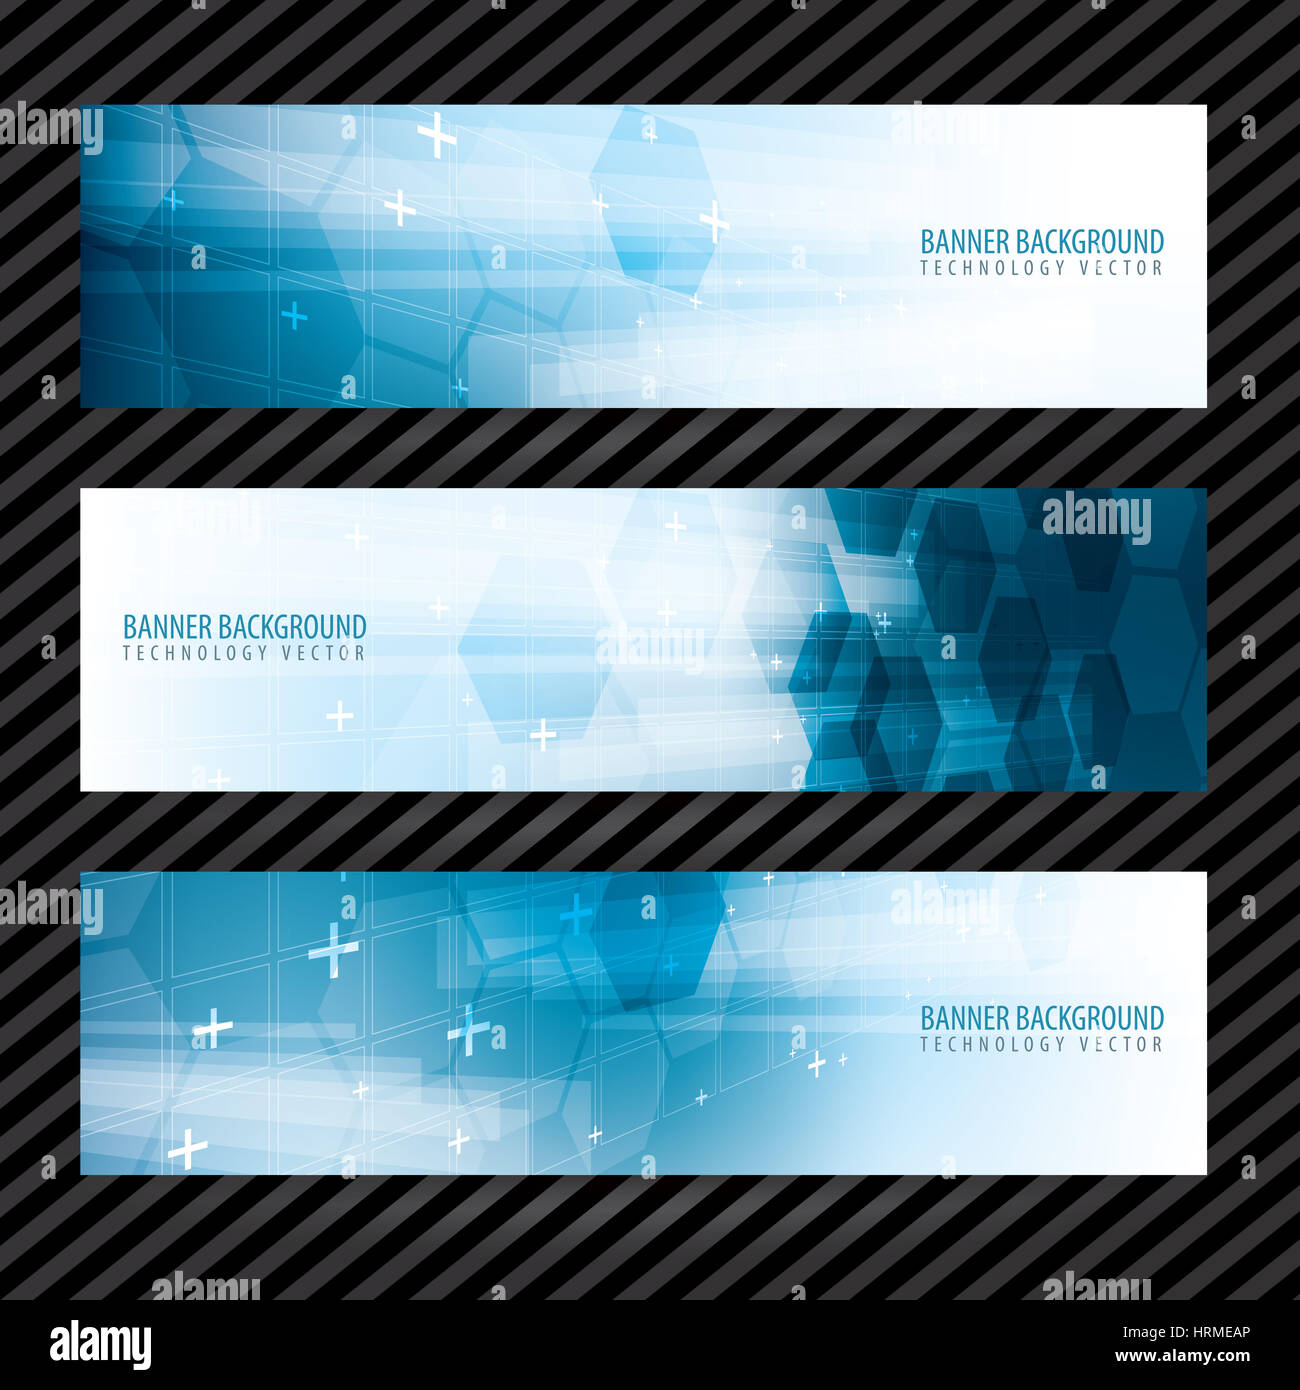 Banner vector design background technology template collection business advertising Stock Photo